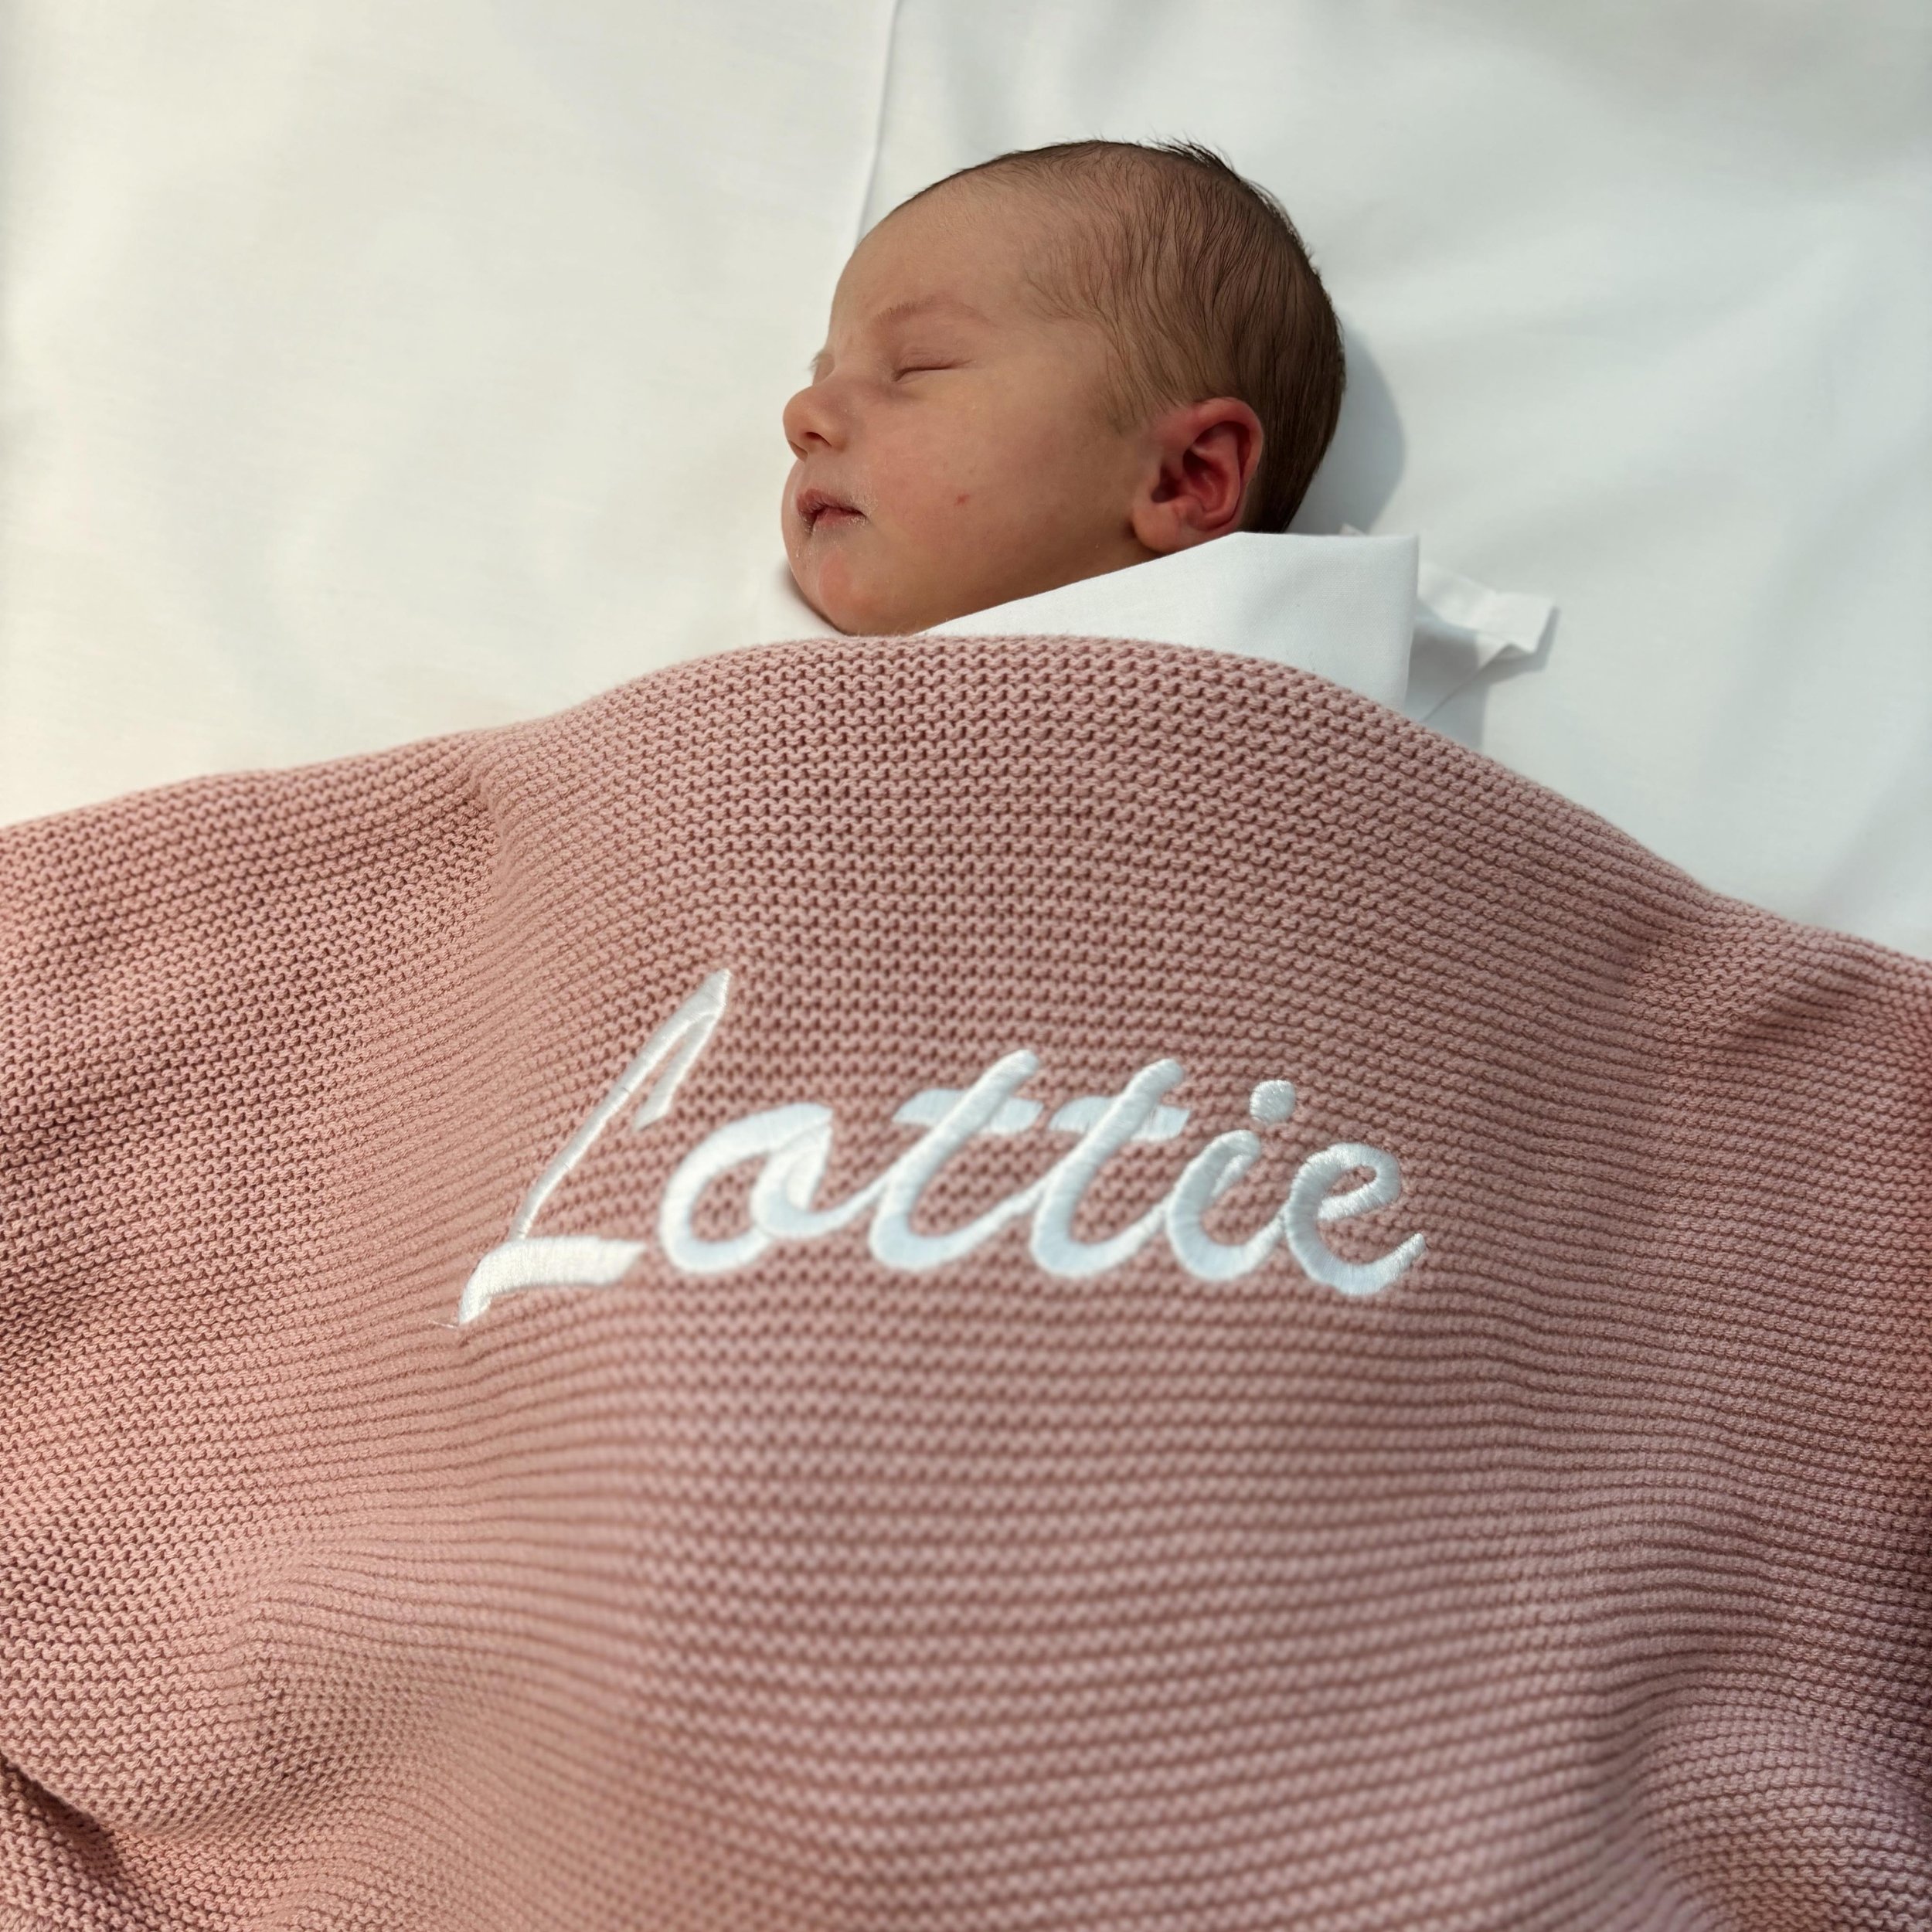 Welcome to the world Charlotte &lsquo;Lottie&rsquo; Catherine Martin. Born 13th May 7.17am. 3.23kg 💕💖